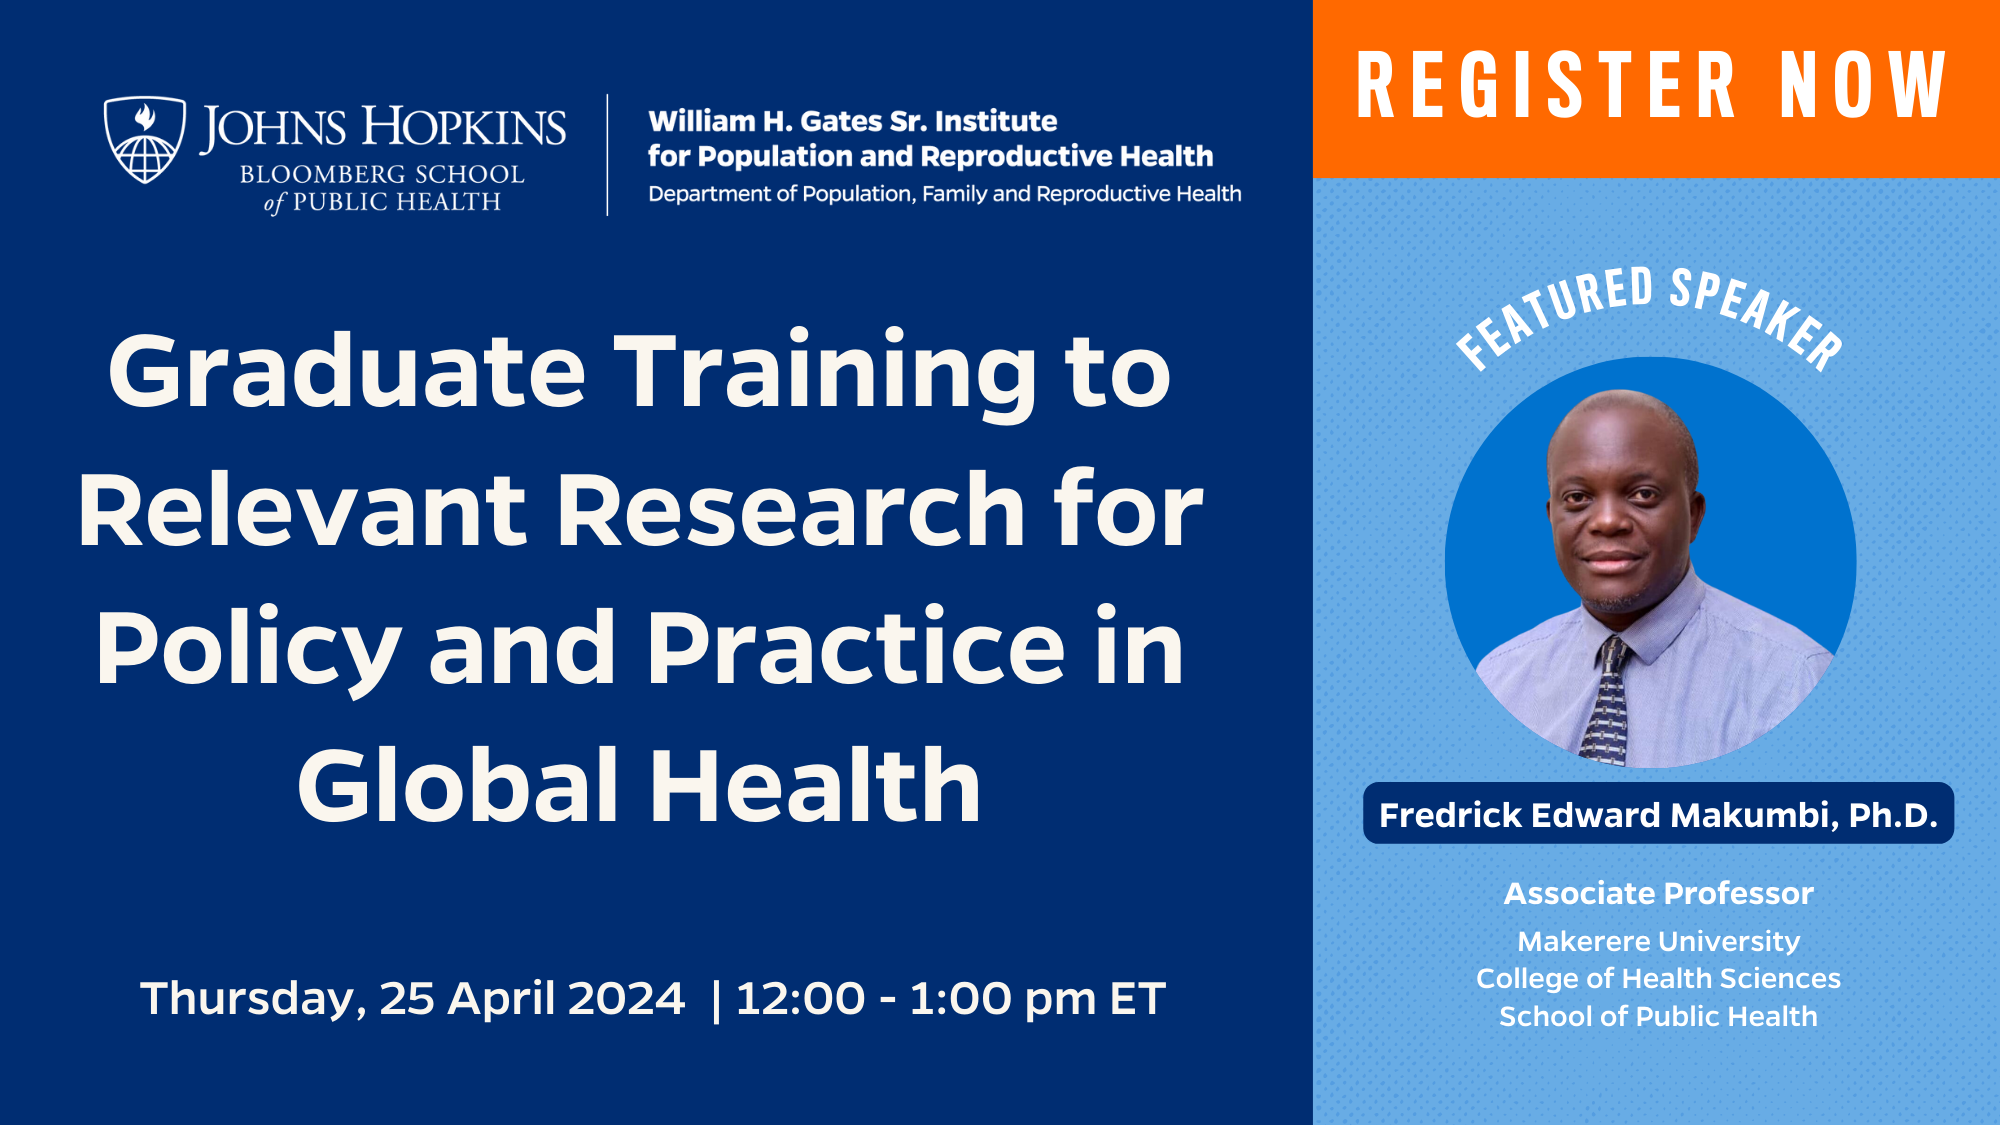 Register Now: Graduate Training to Relevant Research for Policy and Practice in Global Health